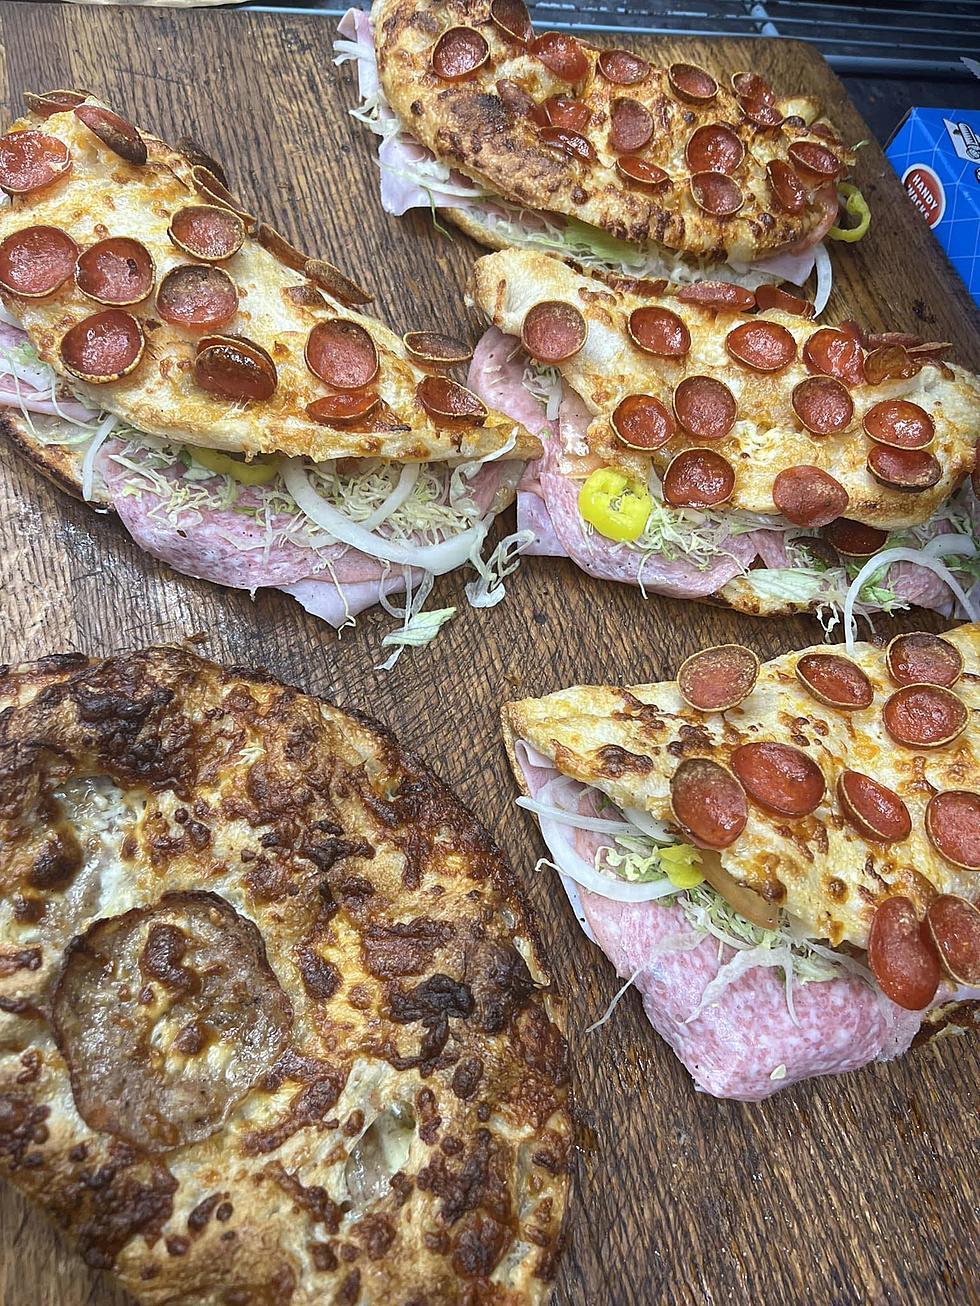 Exeter’s Epic Pizza Sub Makes Road Trip Worth It